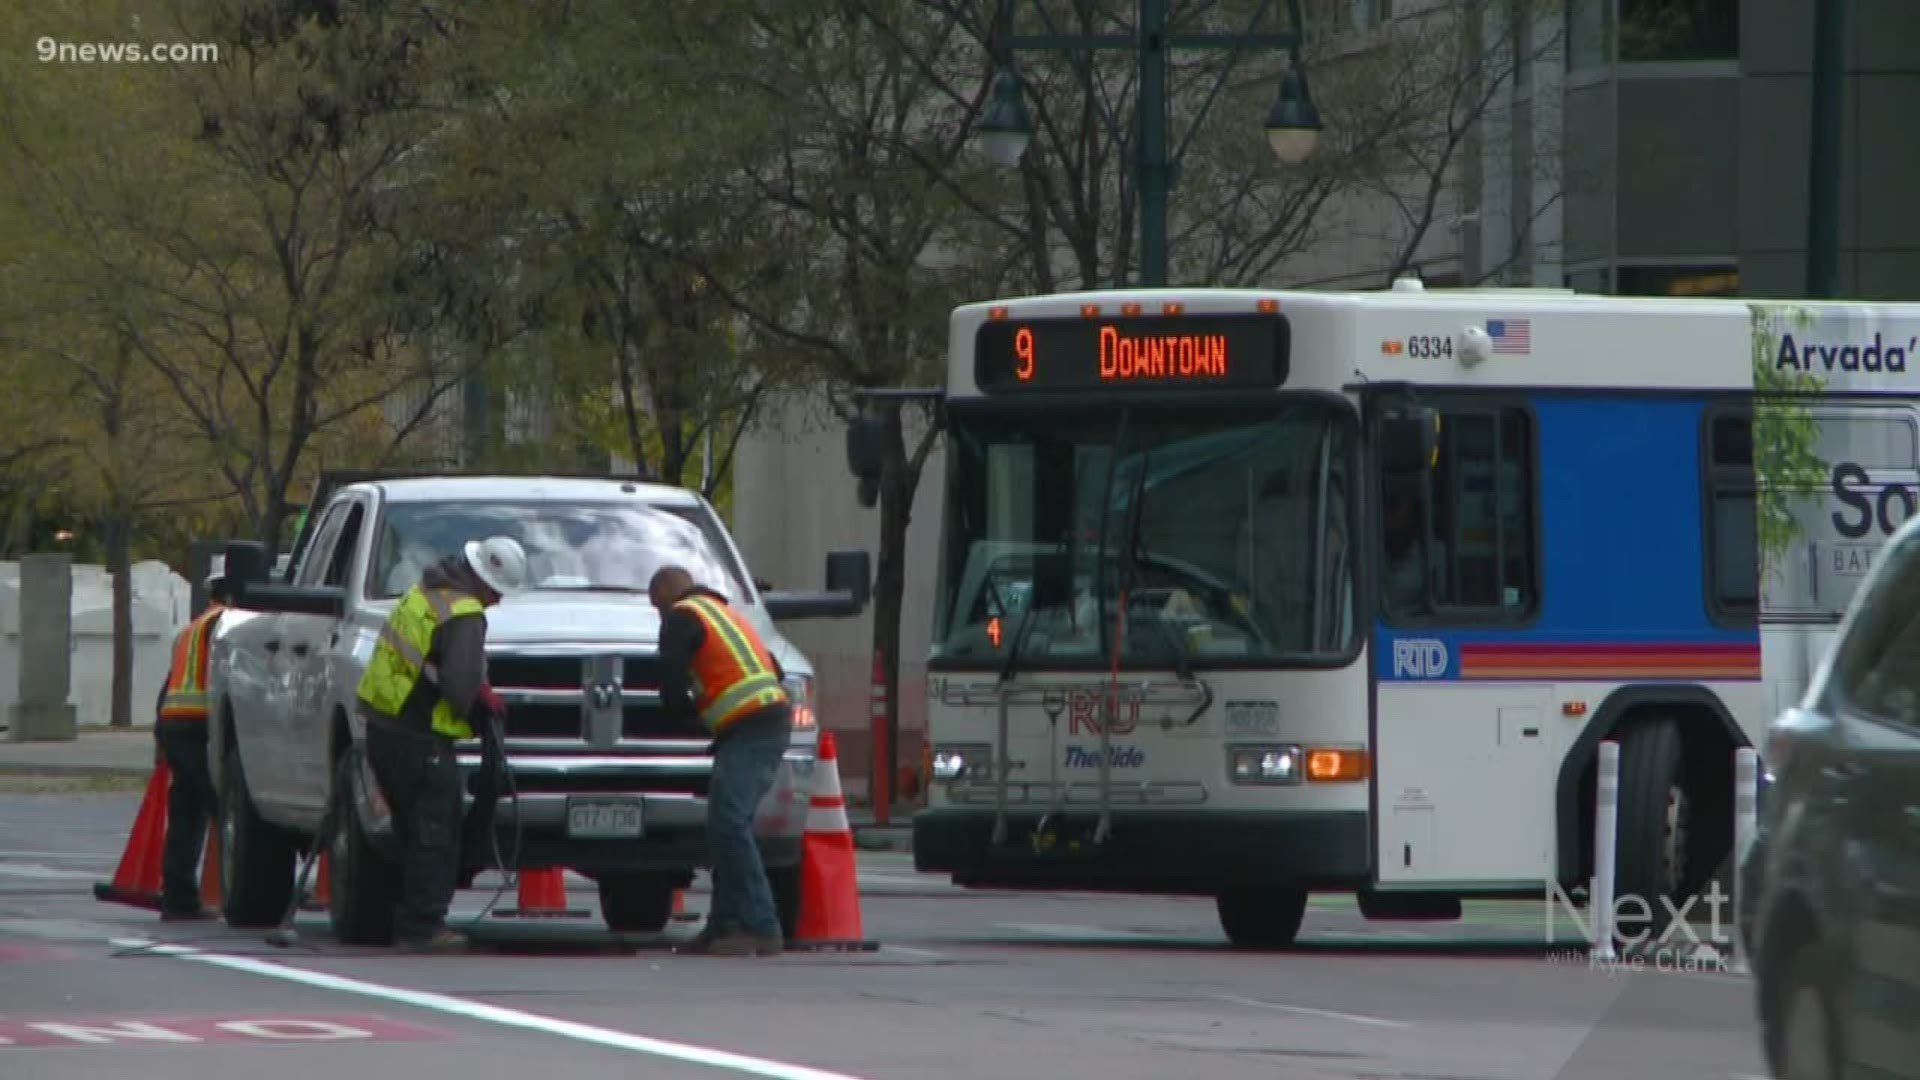 Monday drivers woke up to "bus only" markings on 15th Street in downtown Denver, and similar changes are coming to 17th, 18th and 19th streets, too.